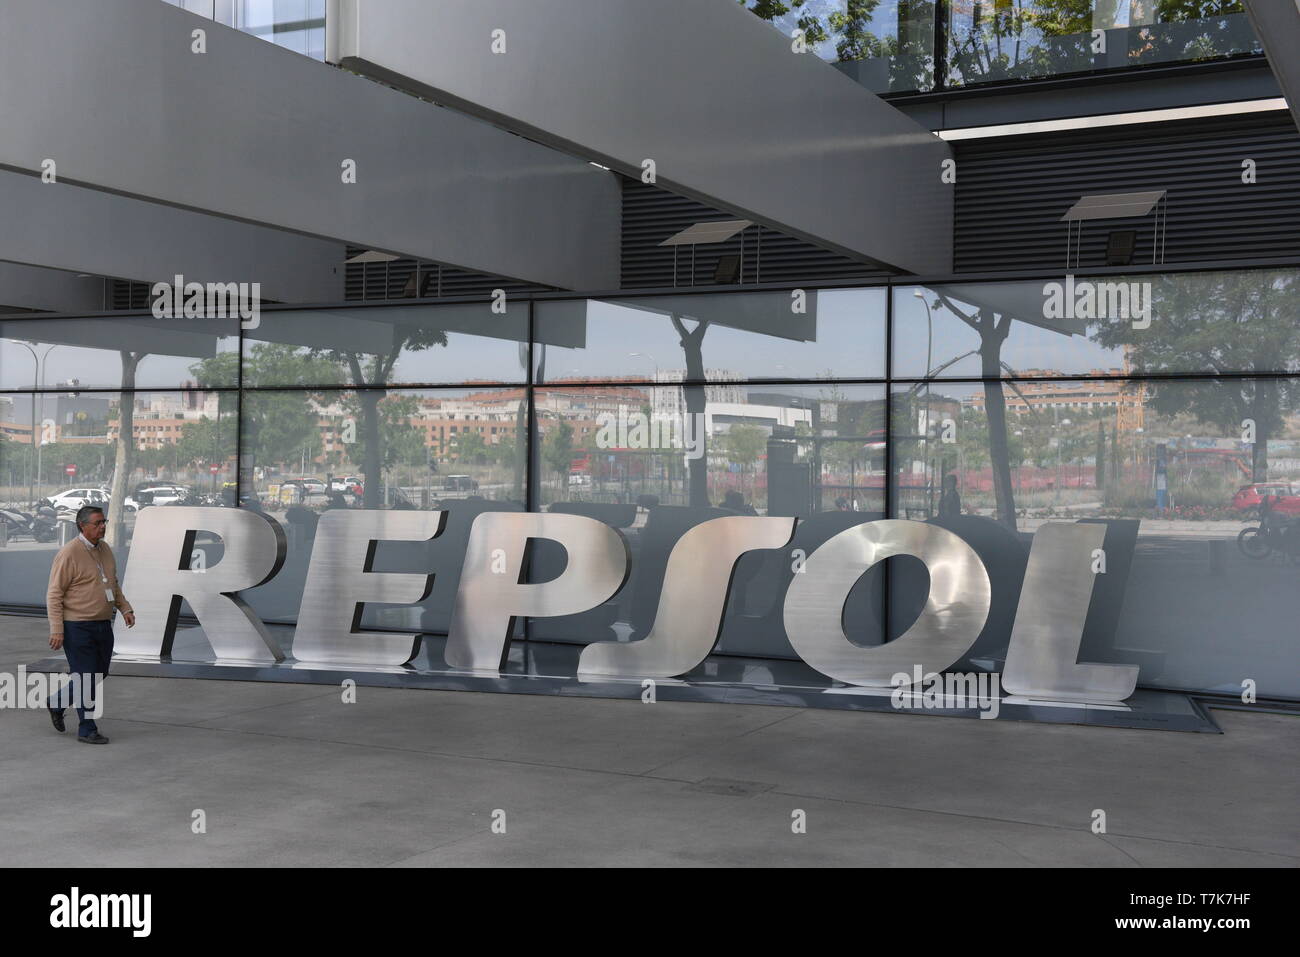 Madrid, Madrid, Spain. 7th May, 2019. A man is seen walking past the Repsol oil company headquarters in Madrid. Credit: John Milner/SOPA Images/ZUMA Wire/Alamy Live News Stock Photo